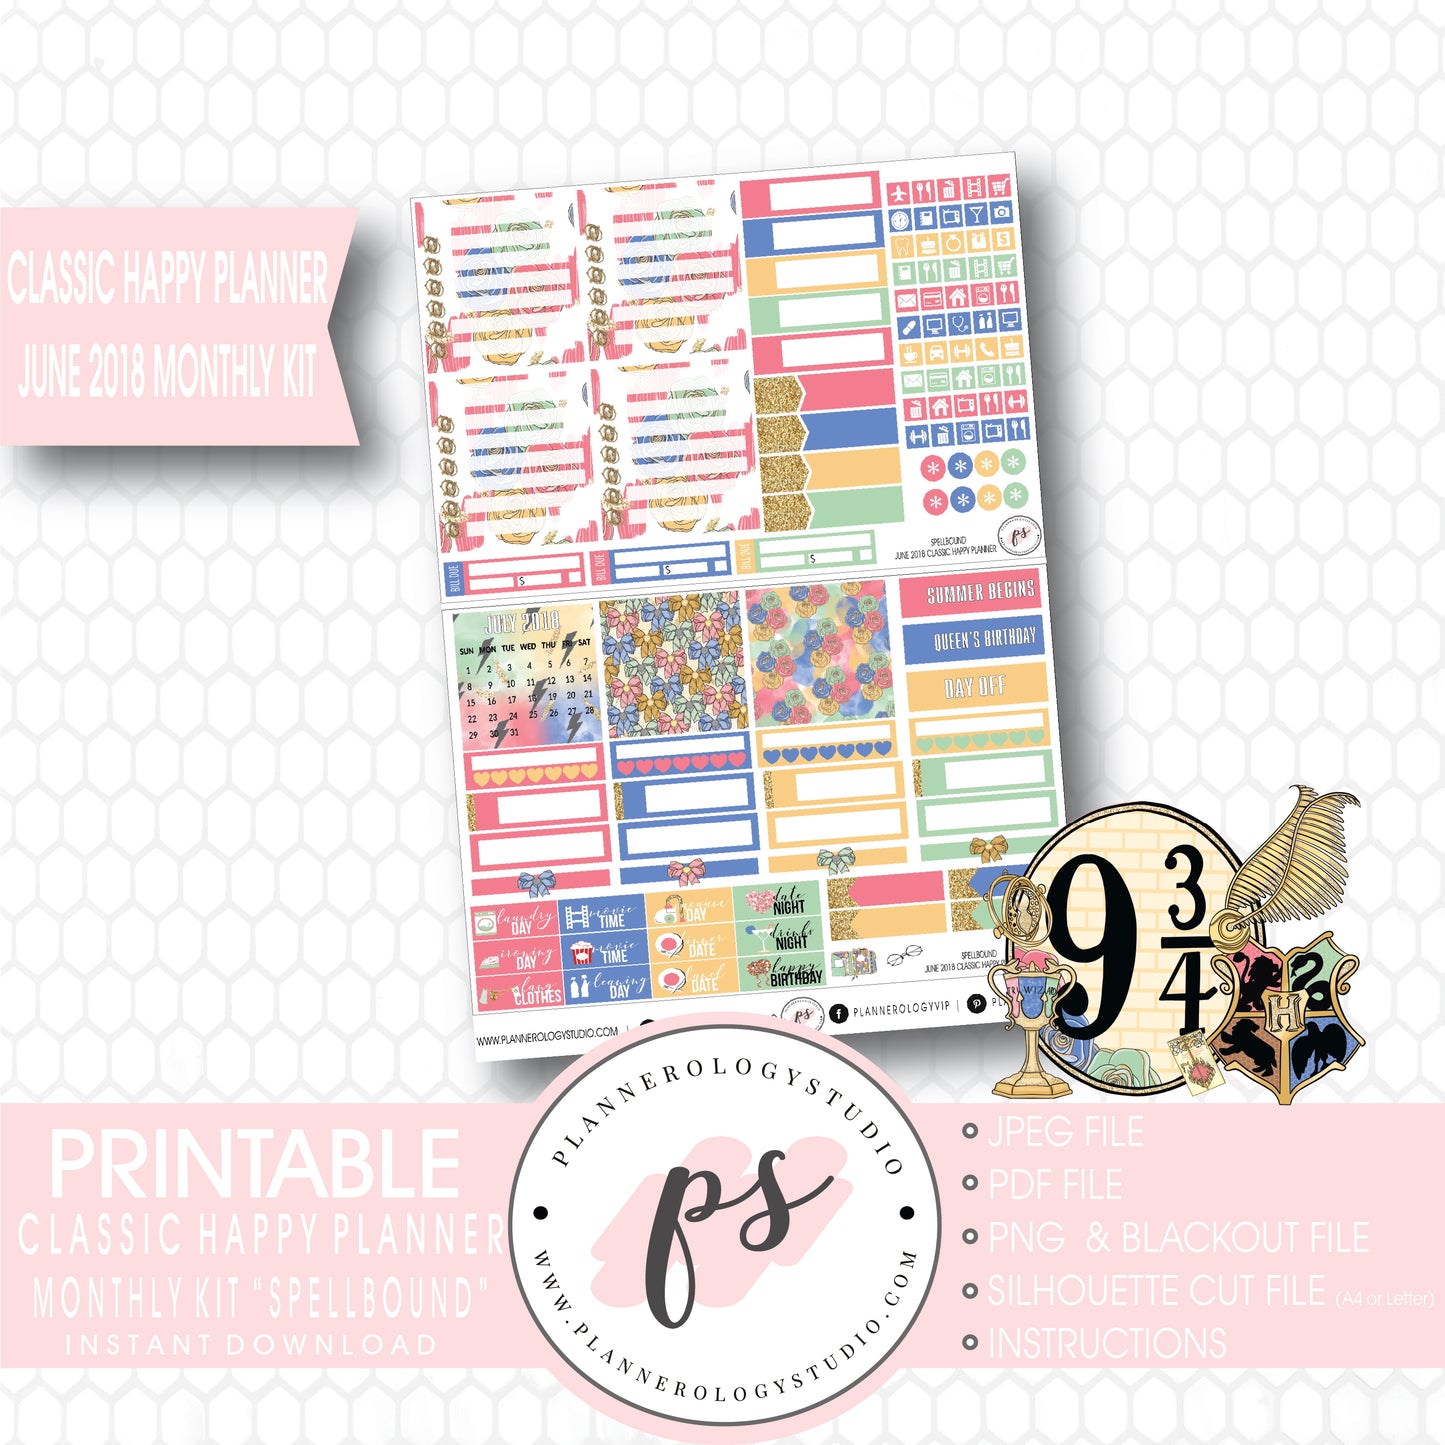 Spellbound (Harry Potter) June 2018 Monthly View Kit Digital Printable Planner Stickers (for use with Classic Happy Planner) - Plannerologystudio